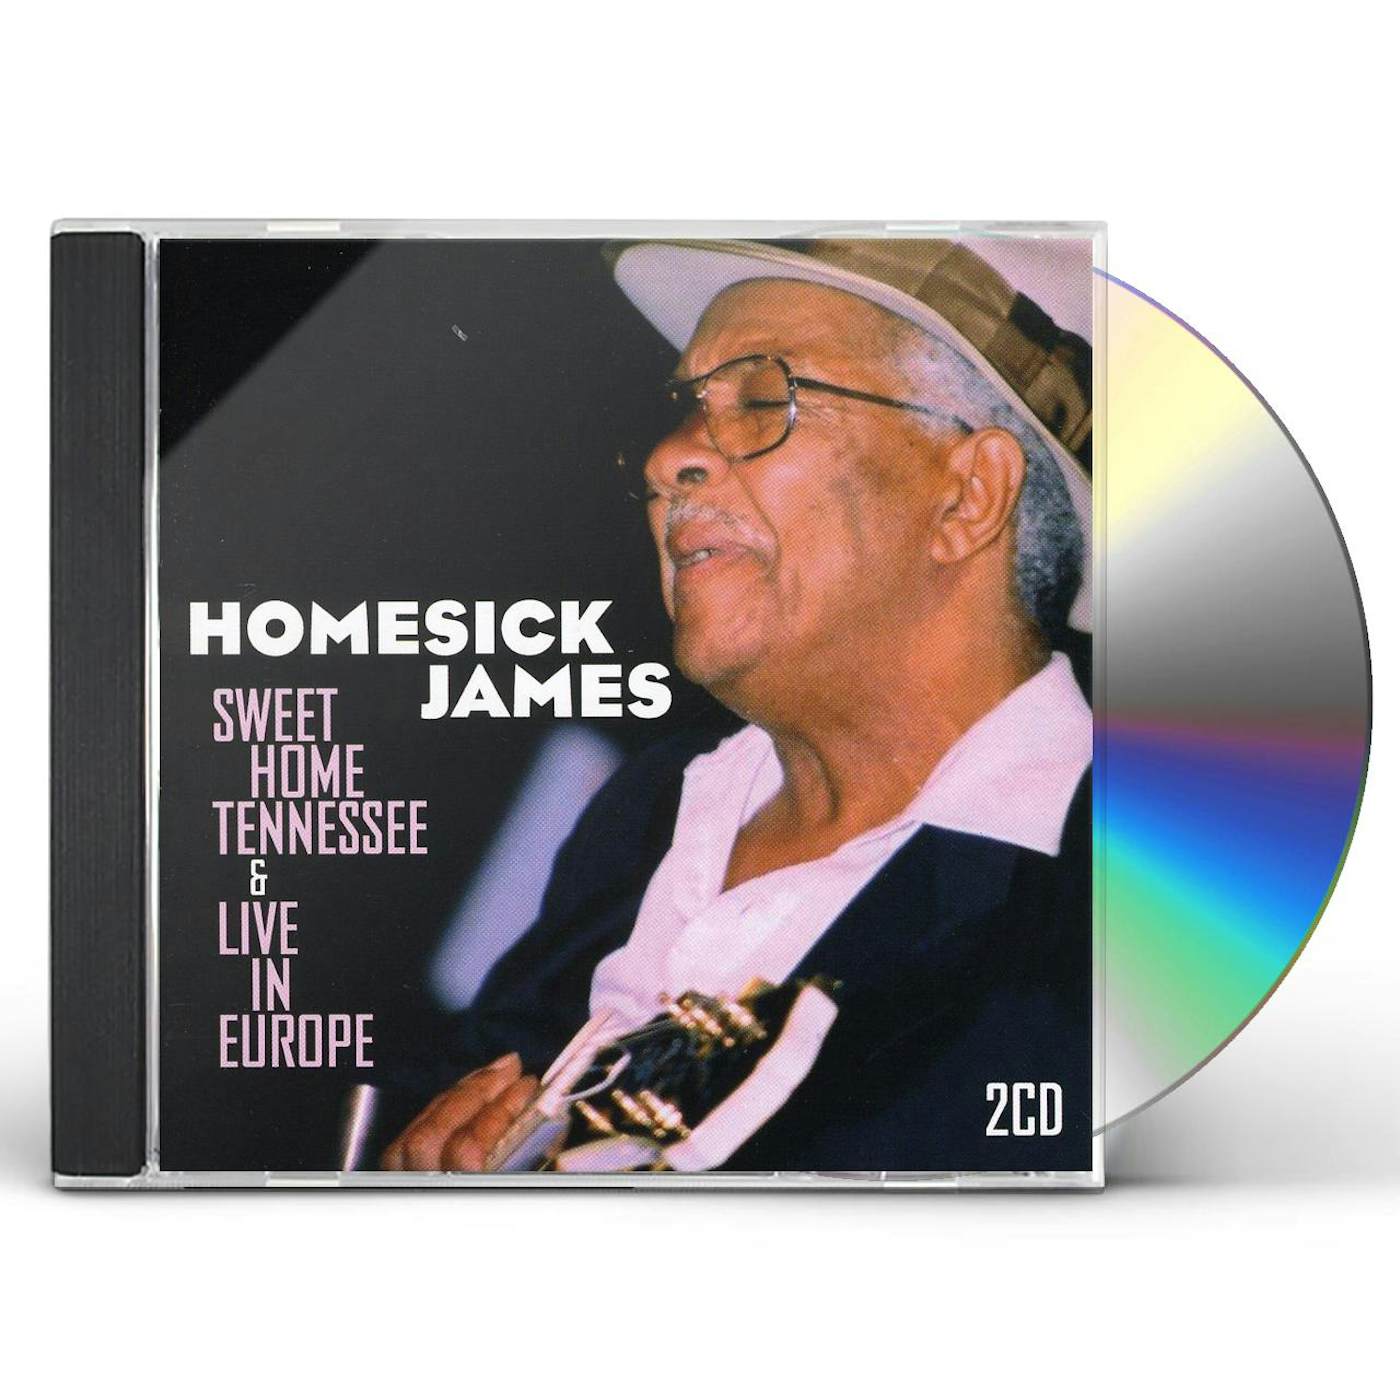 Homesick James SWEET HOME TENNESSEE / LIVE IN EUROPE CD